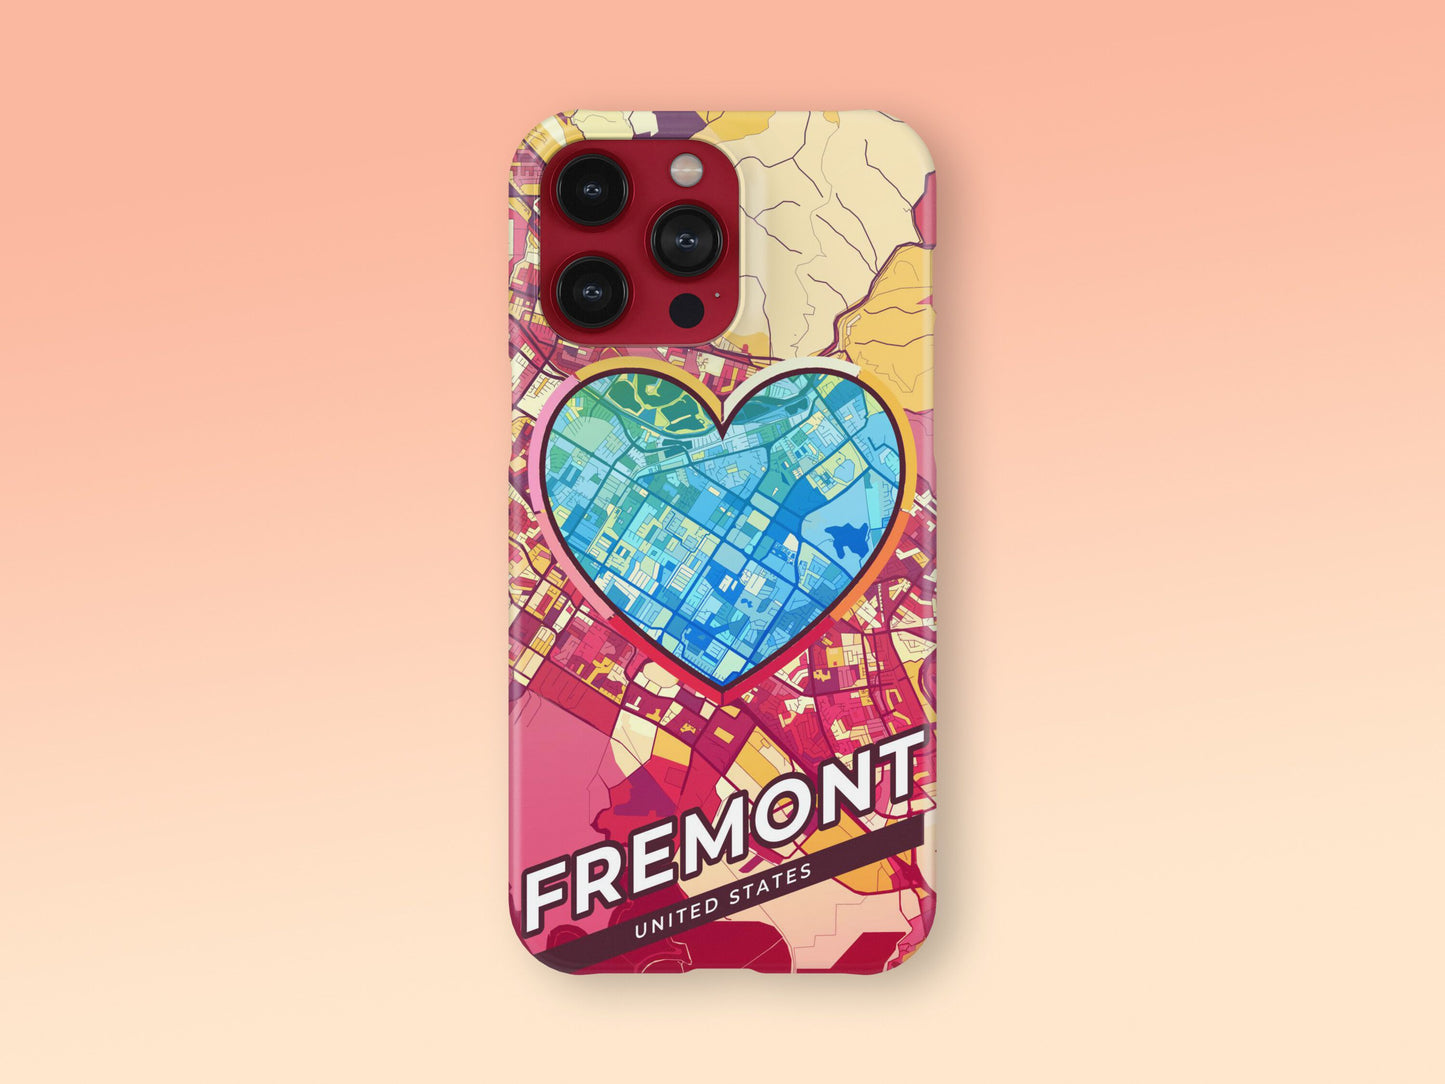 Fremont California slim phone case with colorful icon. Birthday, wedding or housewarming gift. Couple match cases. 2